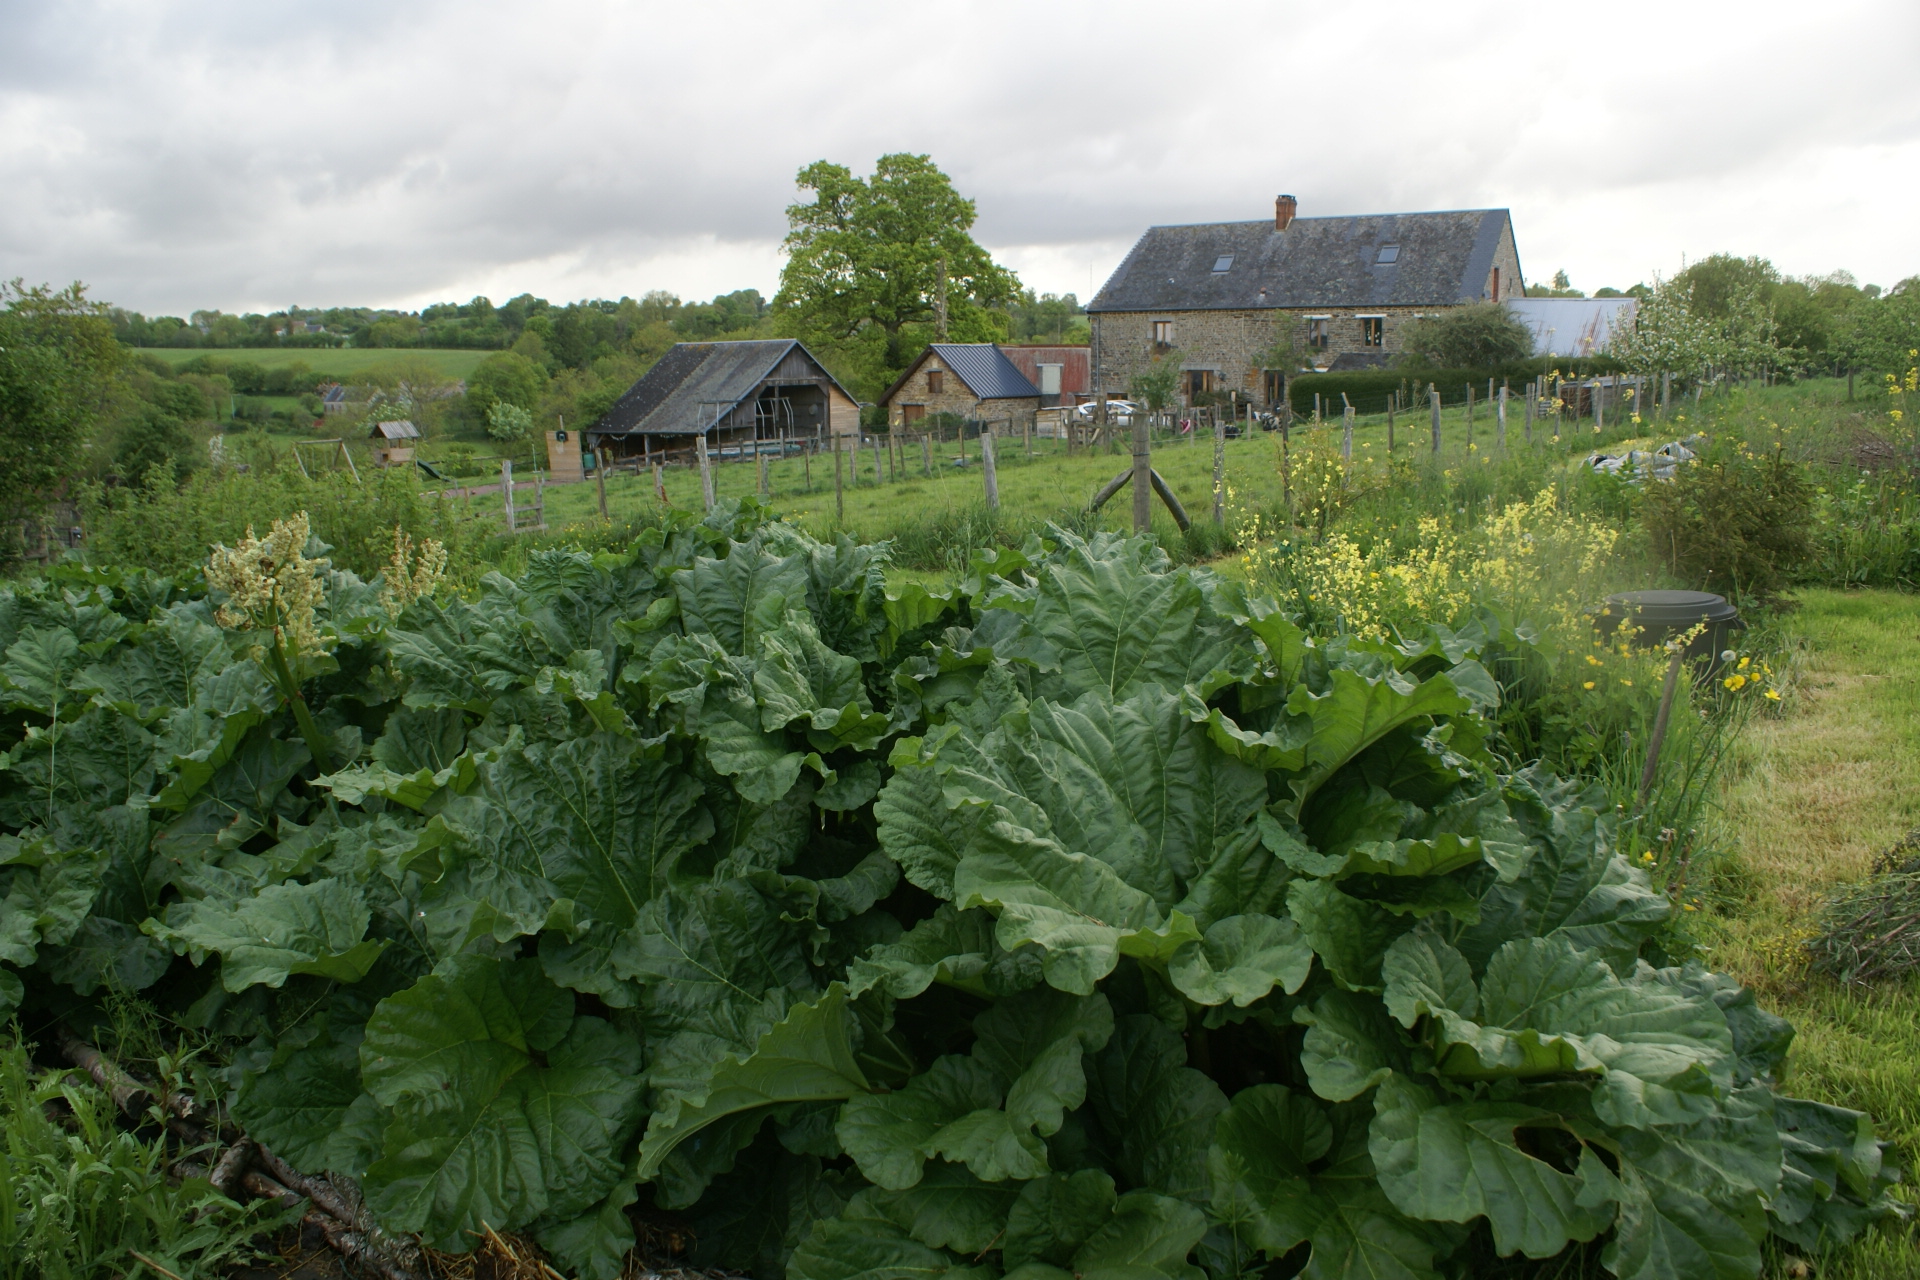 Rhubarb at Eco-Gites of Lenault, a 5 person gite in Normandy.